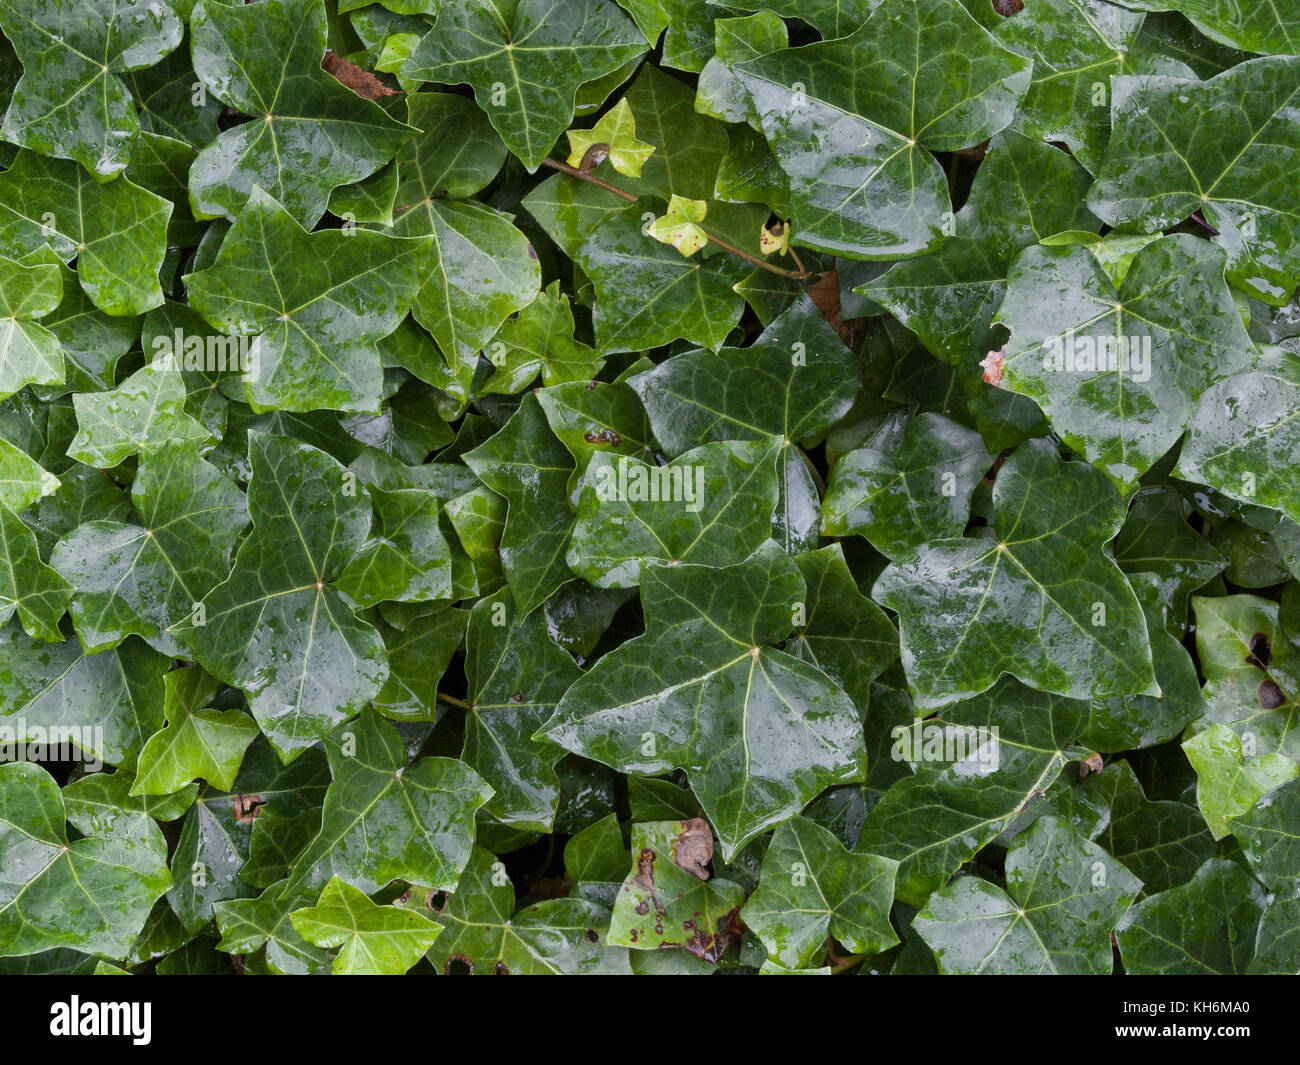 Cluster of wet Common Ivy / Hedera helix leaves. Creeping ivy. Stock Photo